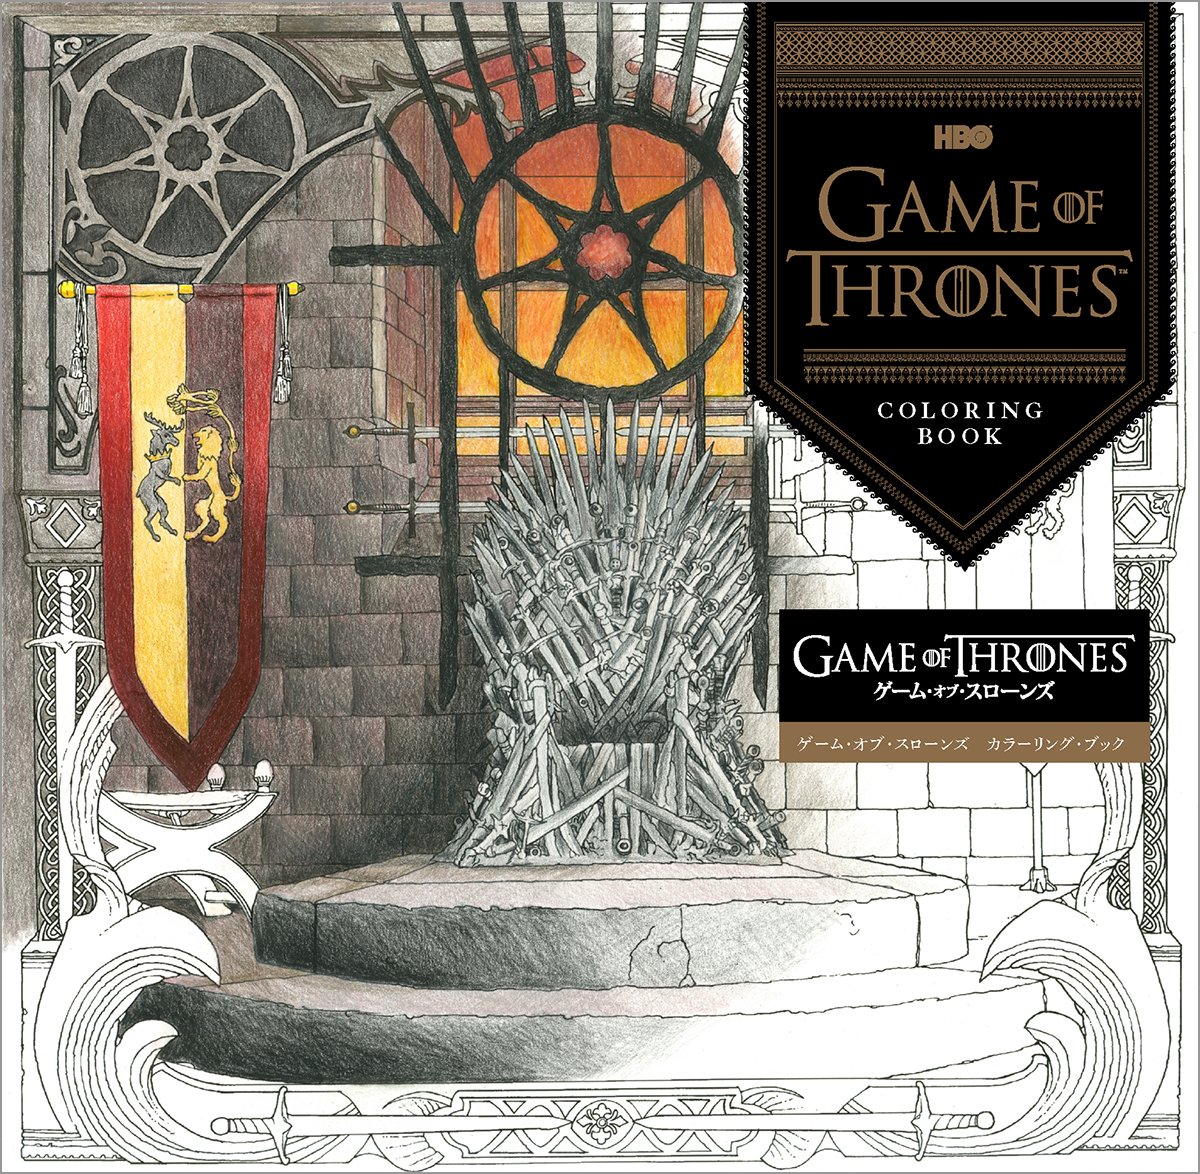 HBO GAME OF THRONES COLORLING BOOK